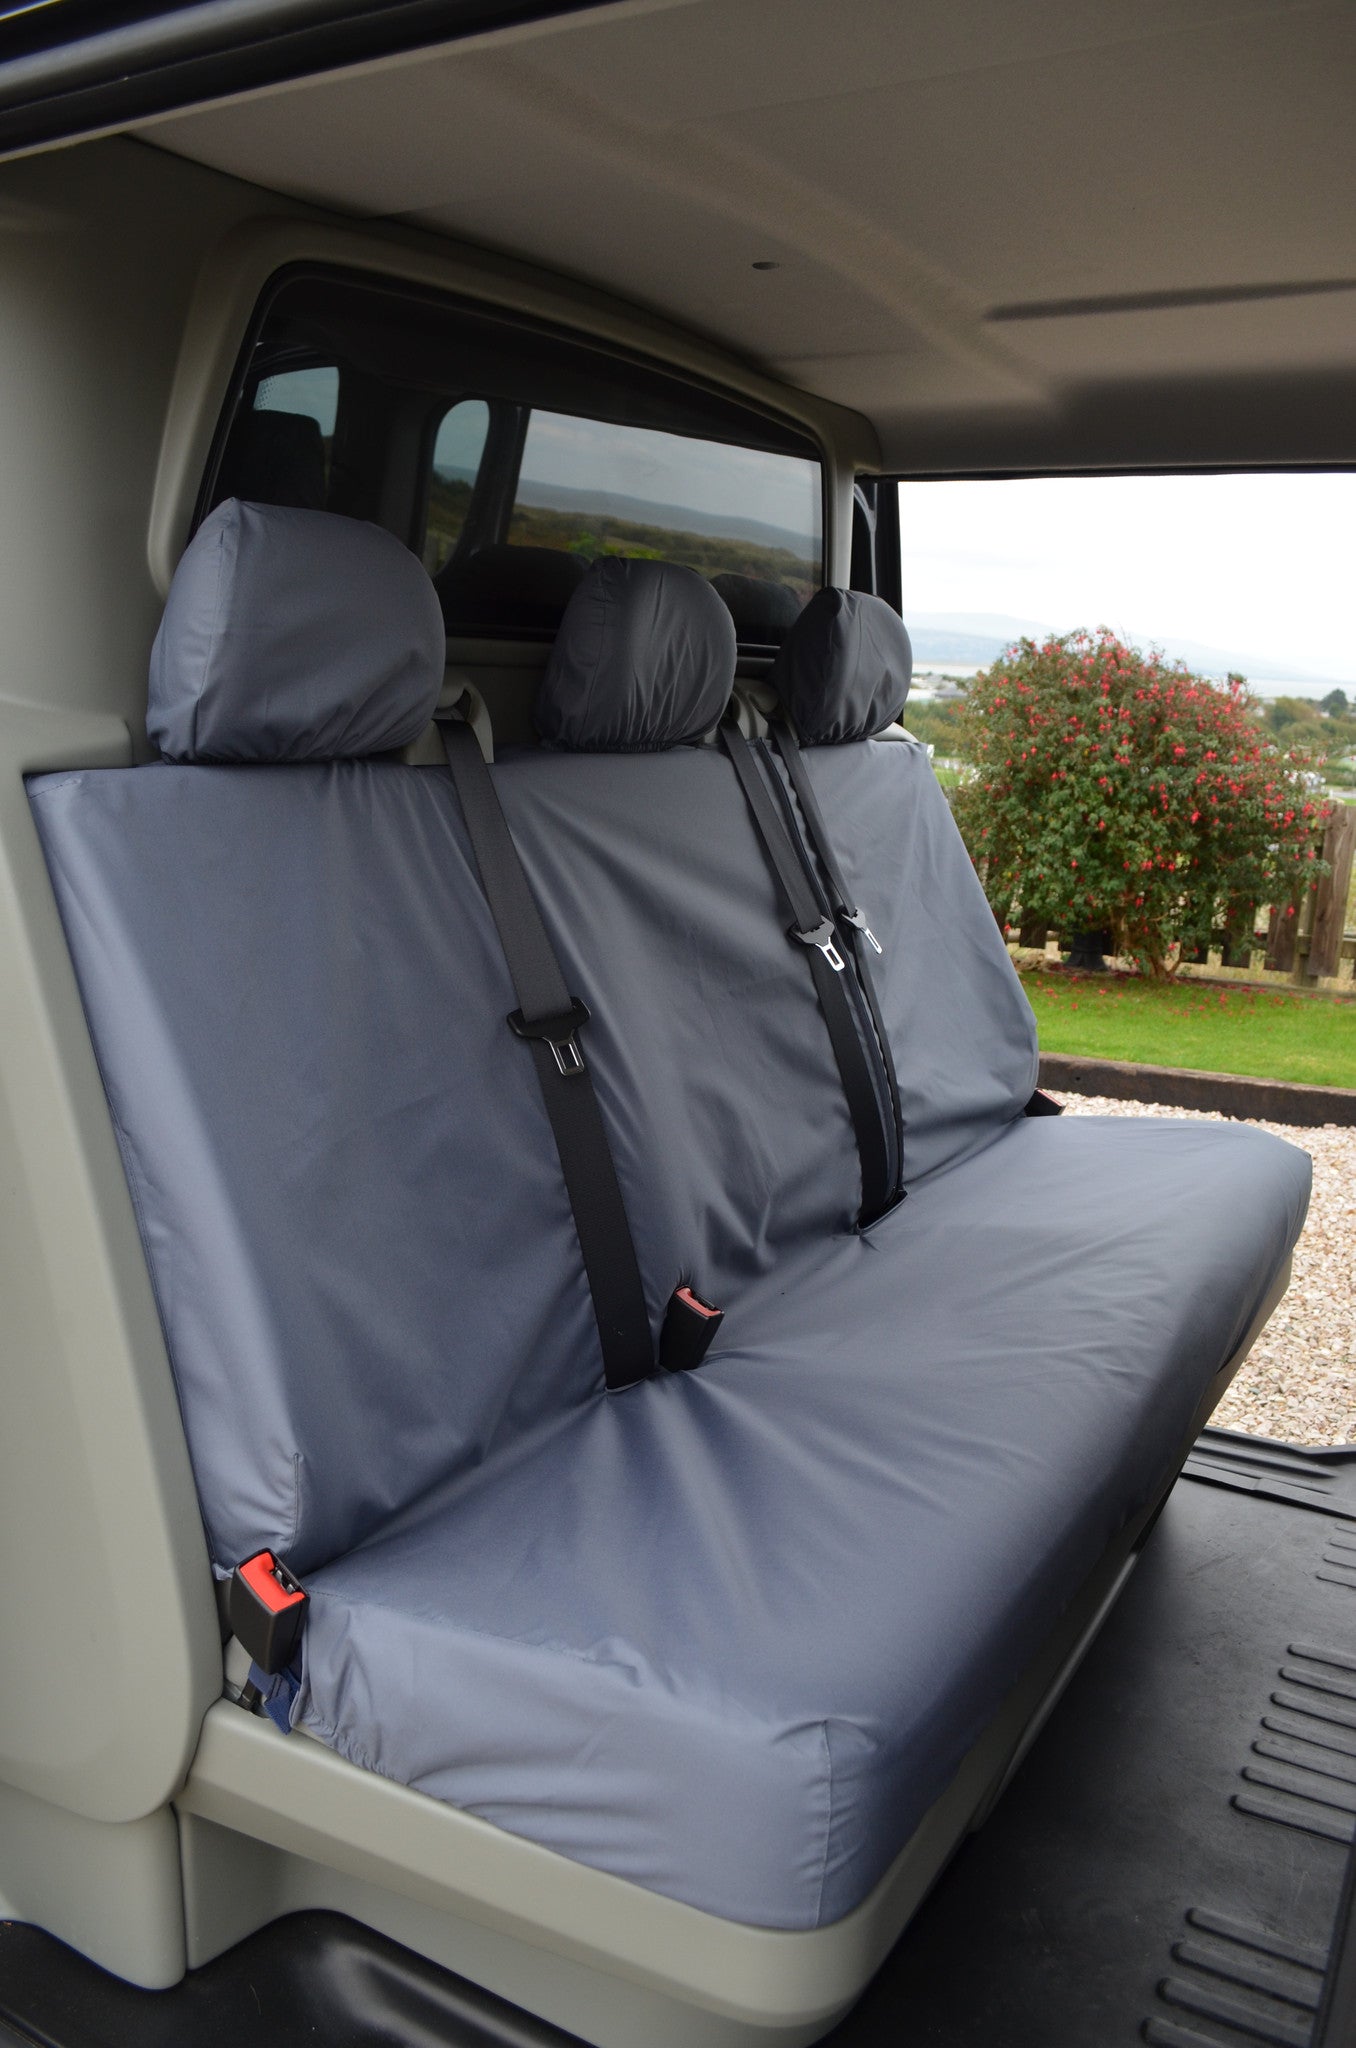 Renault Trafic Crew Cab 2001 - 2006 Rear Seat Covers Grey Turtle Covers Ltd